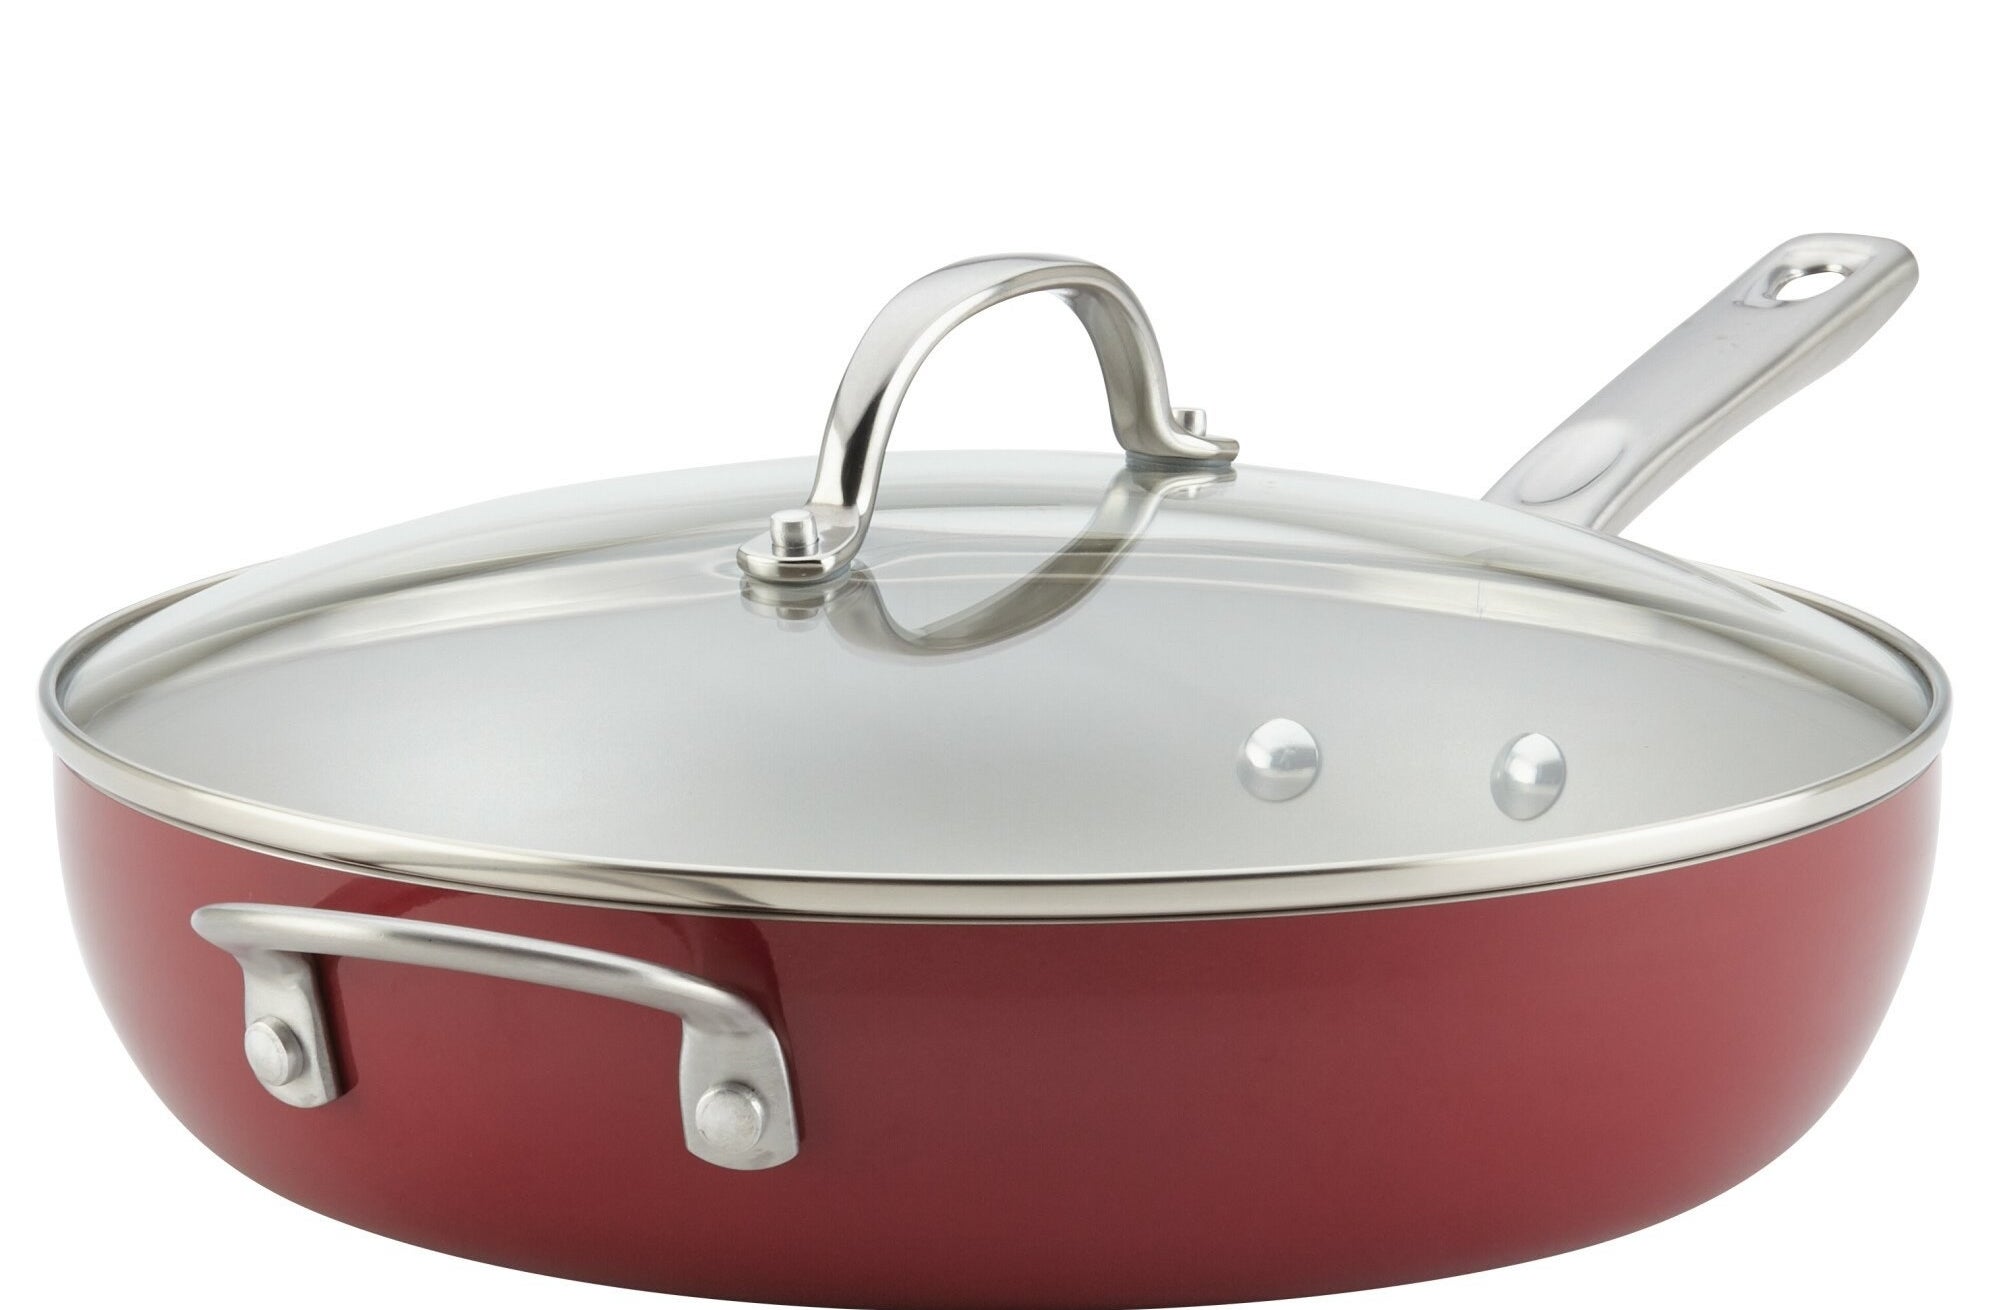 the red pan with lid on